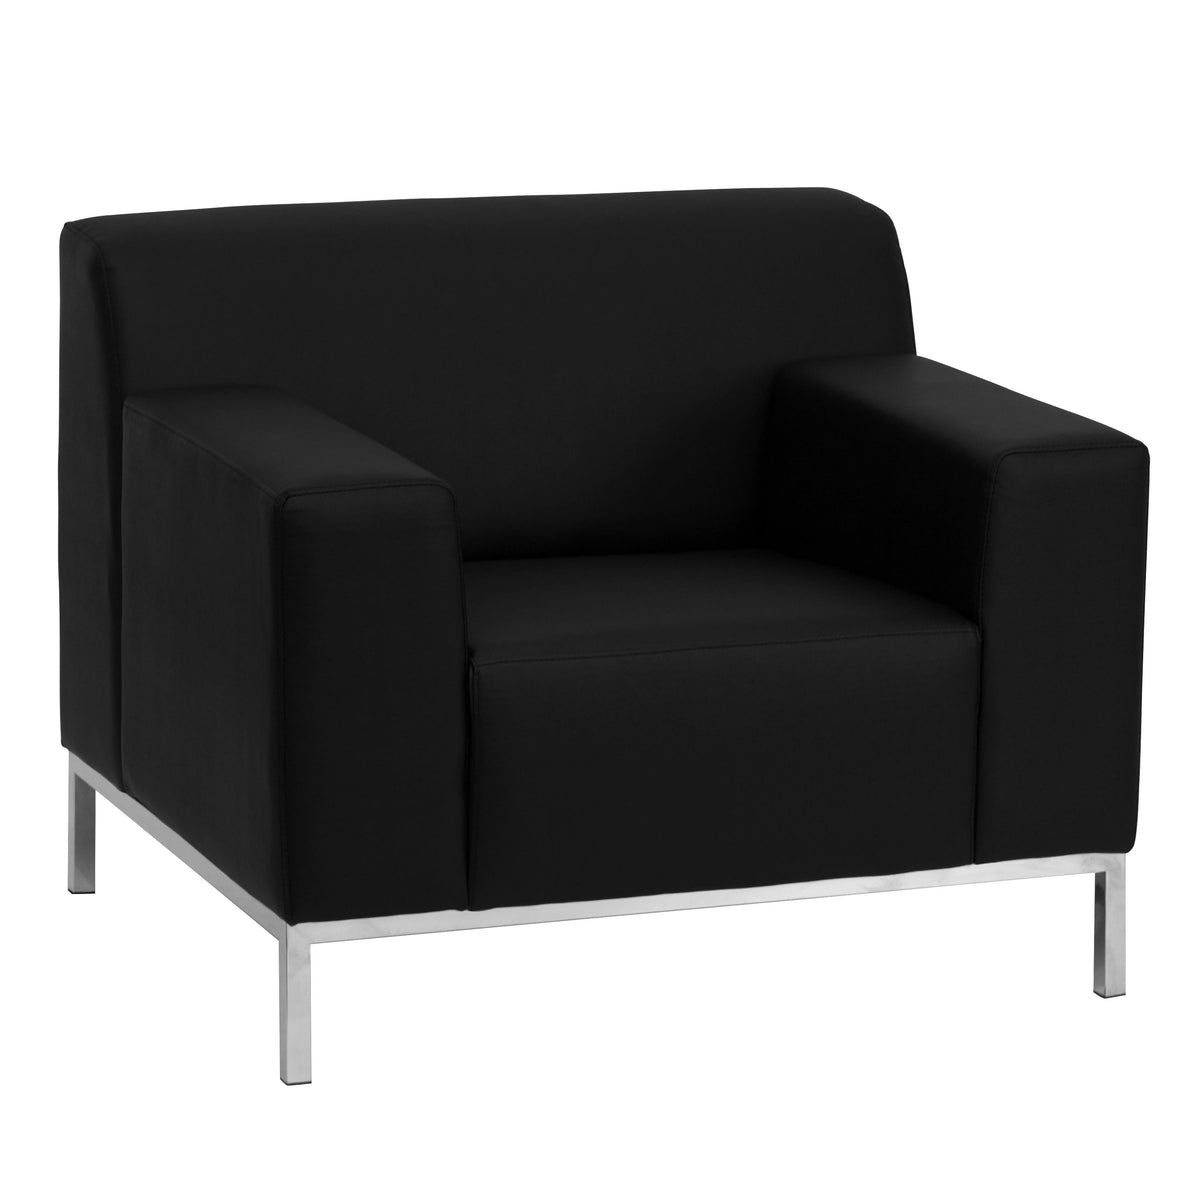 Black LeatherSoft Reception Room Set w/ Line Stitching &Stainless Steel Frame